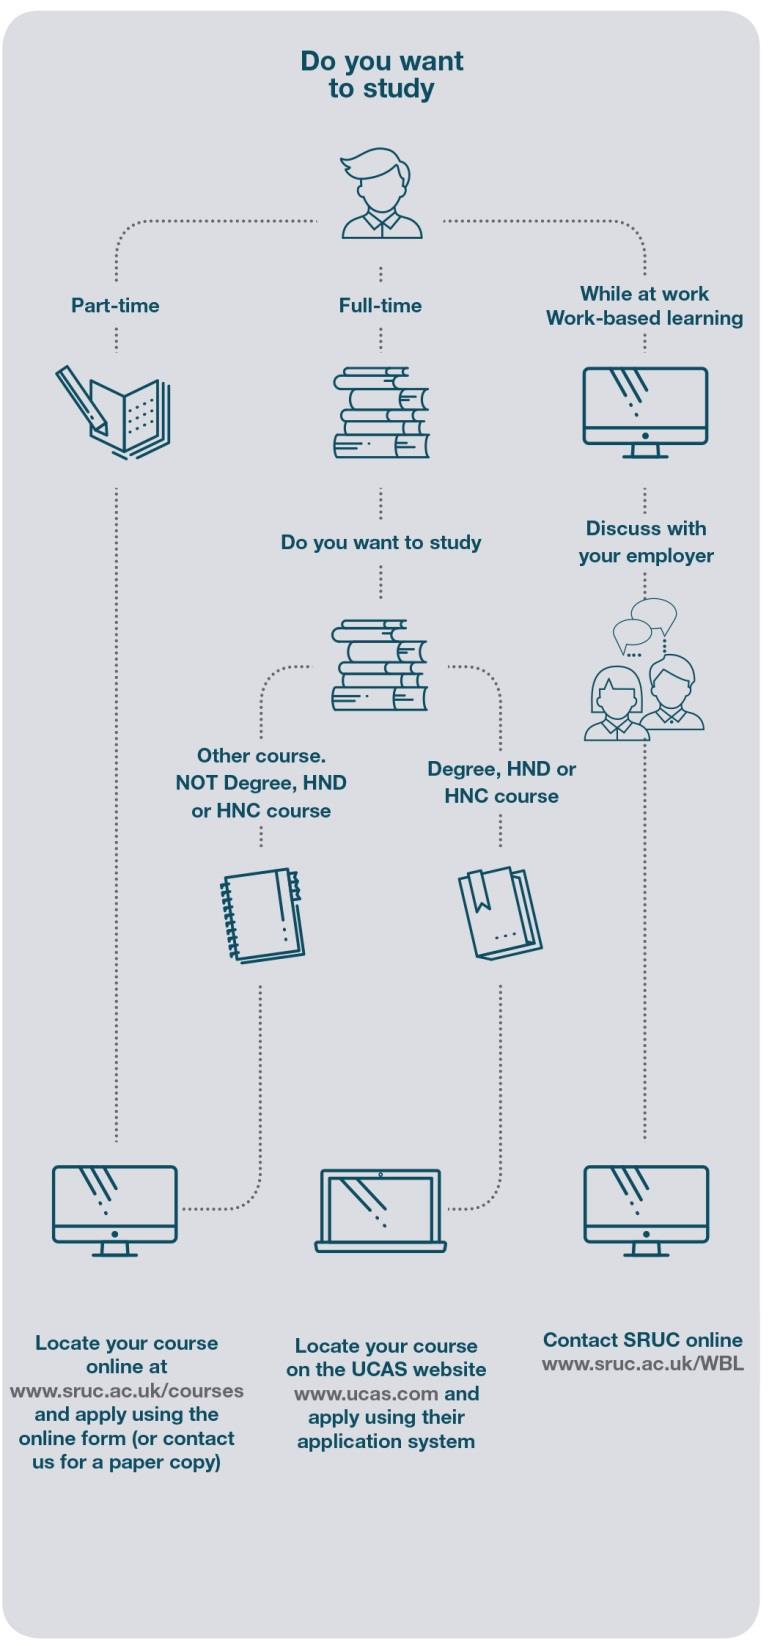 How to Apply Choose a course that interests you. If you want to study full time you must apply through UCAS. Visit the UCAS website: www.ucas.com for some advice.